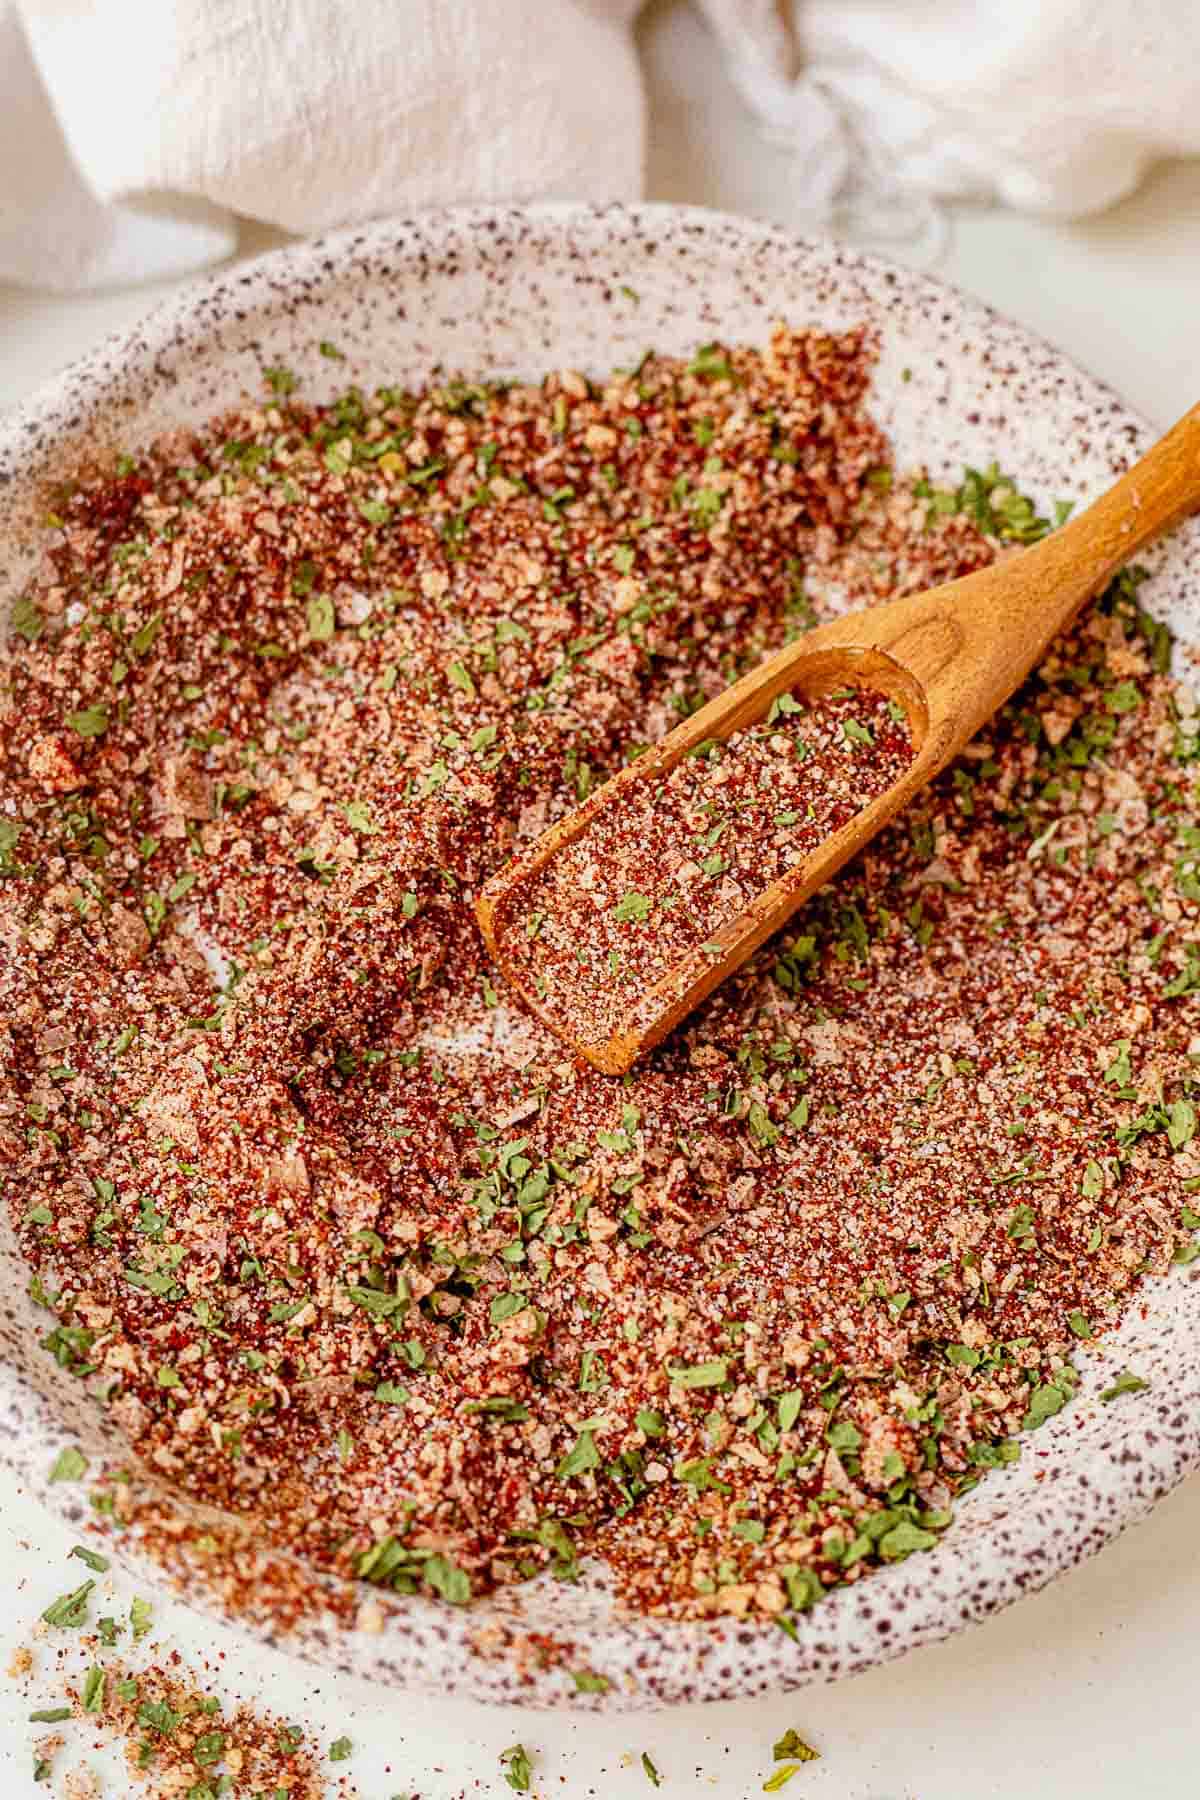 Trader Joe's Everything But the Elote Seasoning Blend includes hints of  nearly everything that comes along…